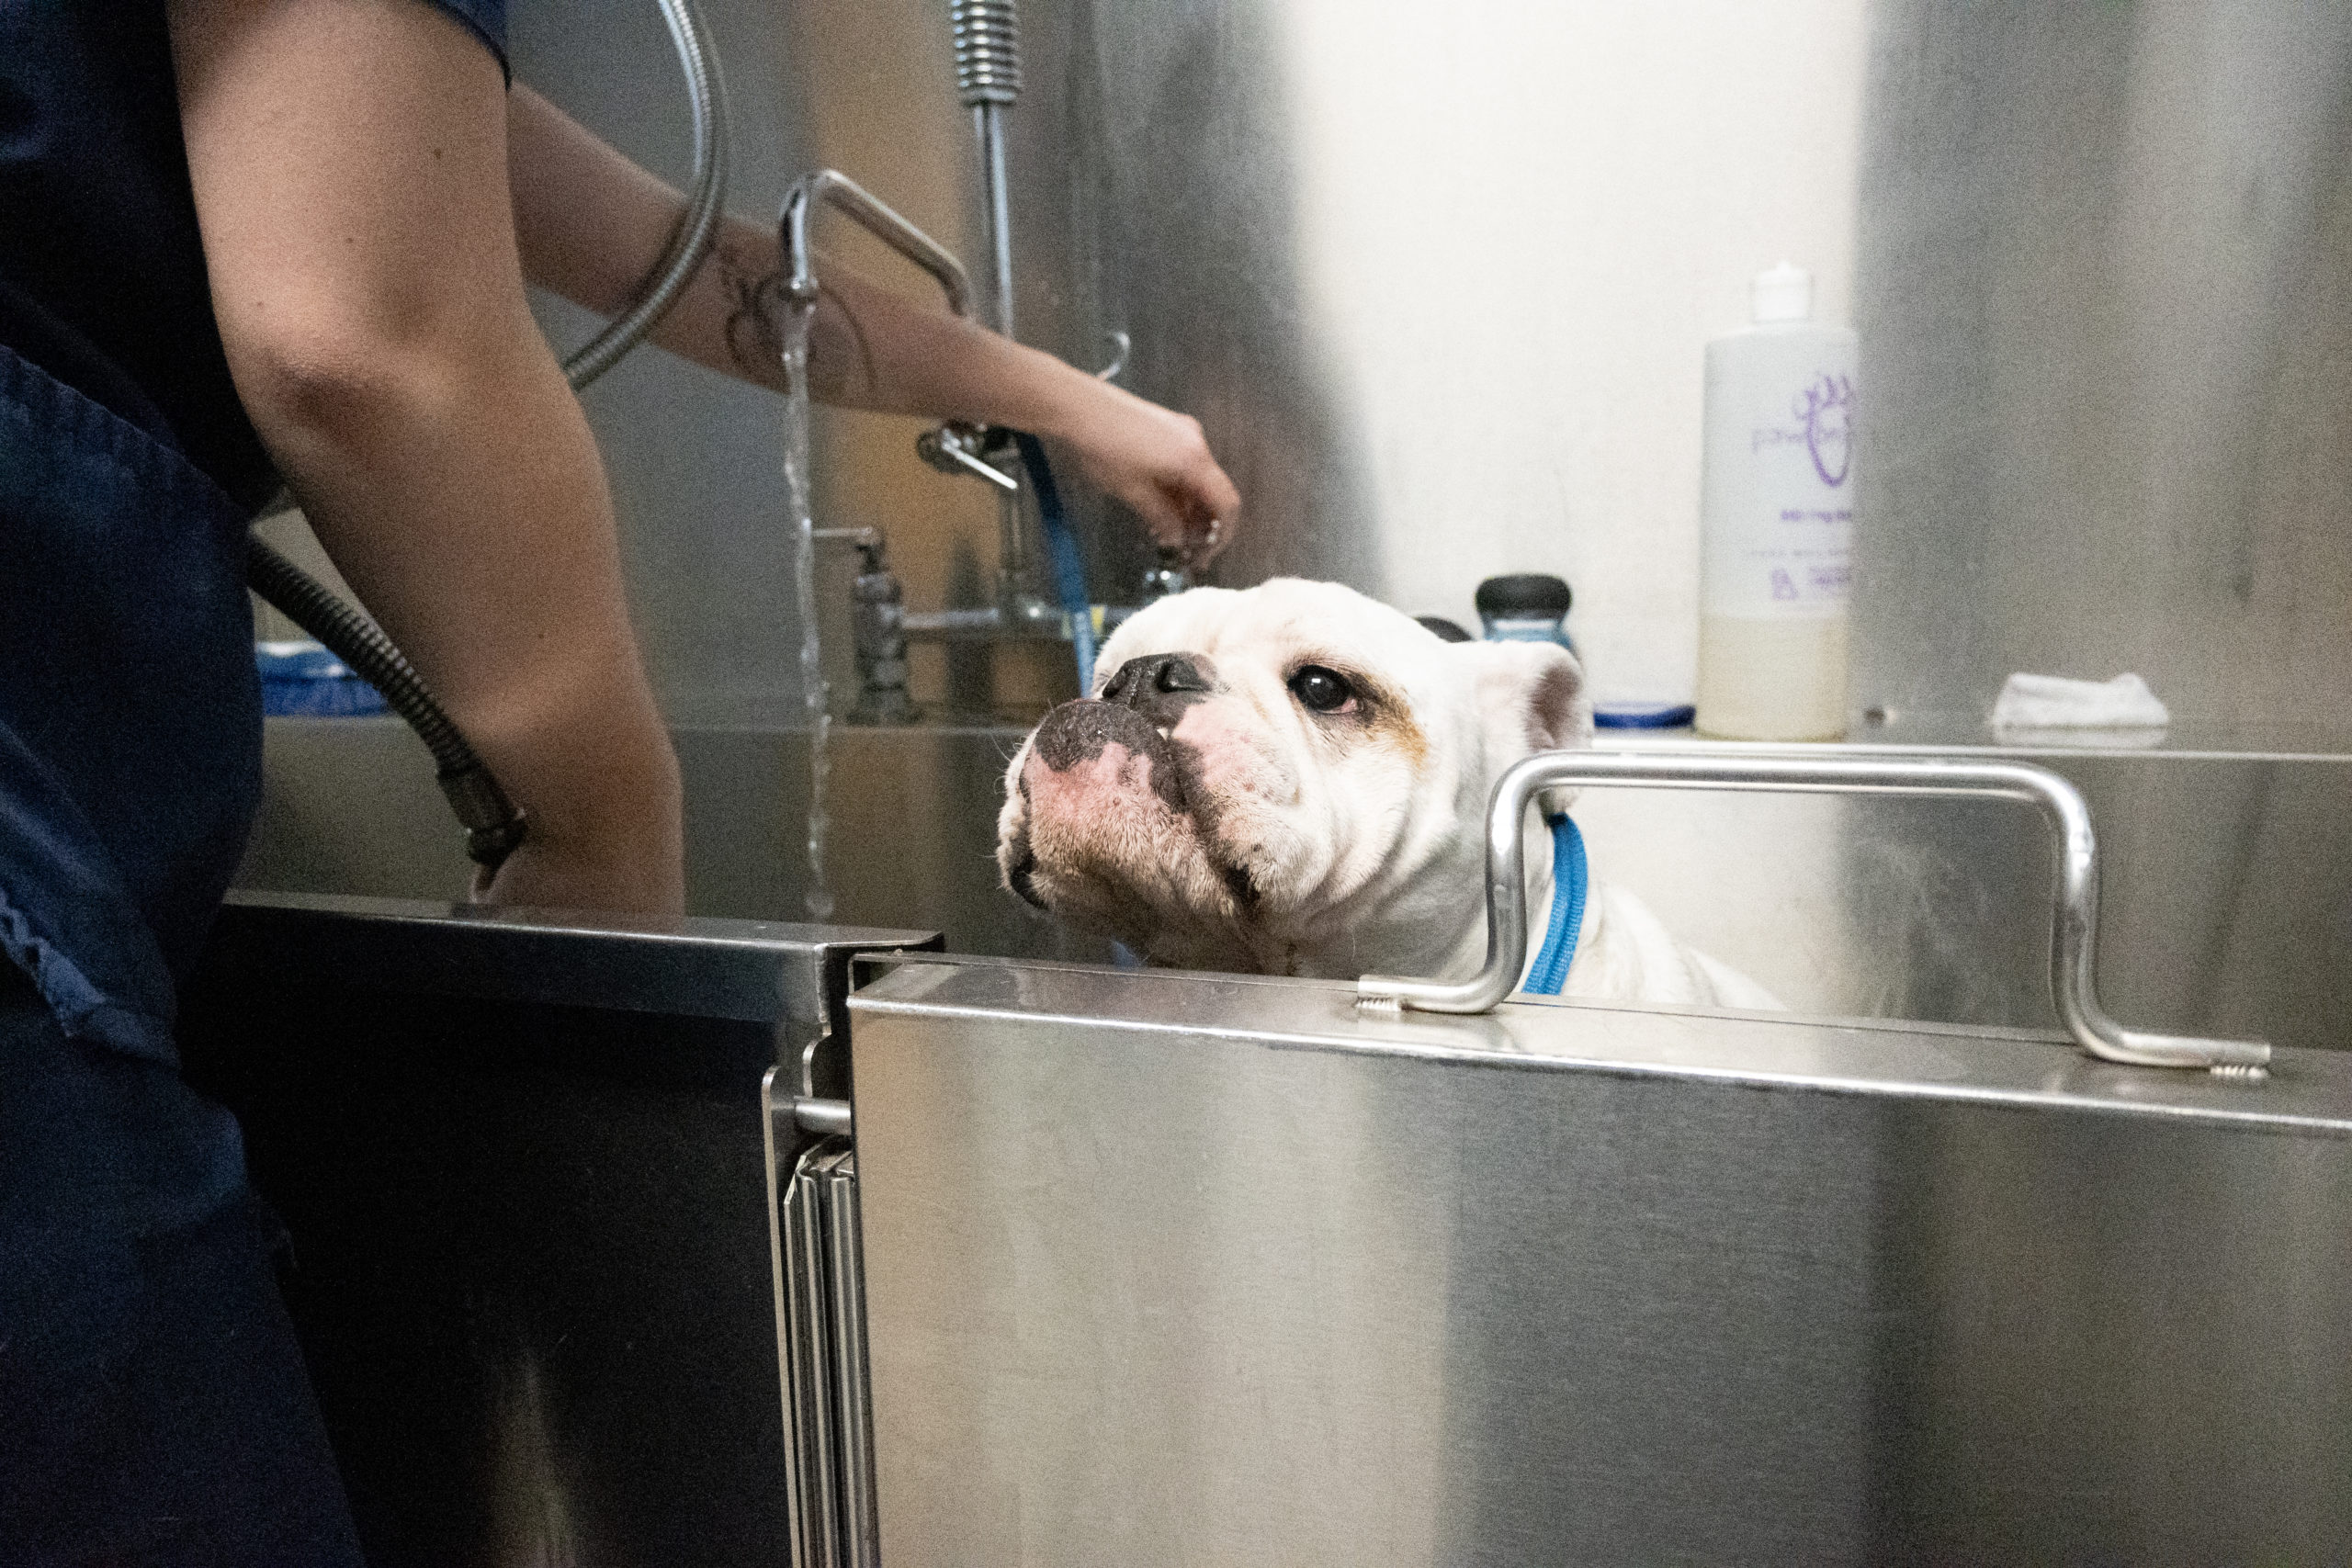 A bulldog looks out from the tub it is getting a bath in.